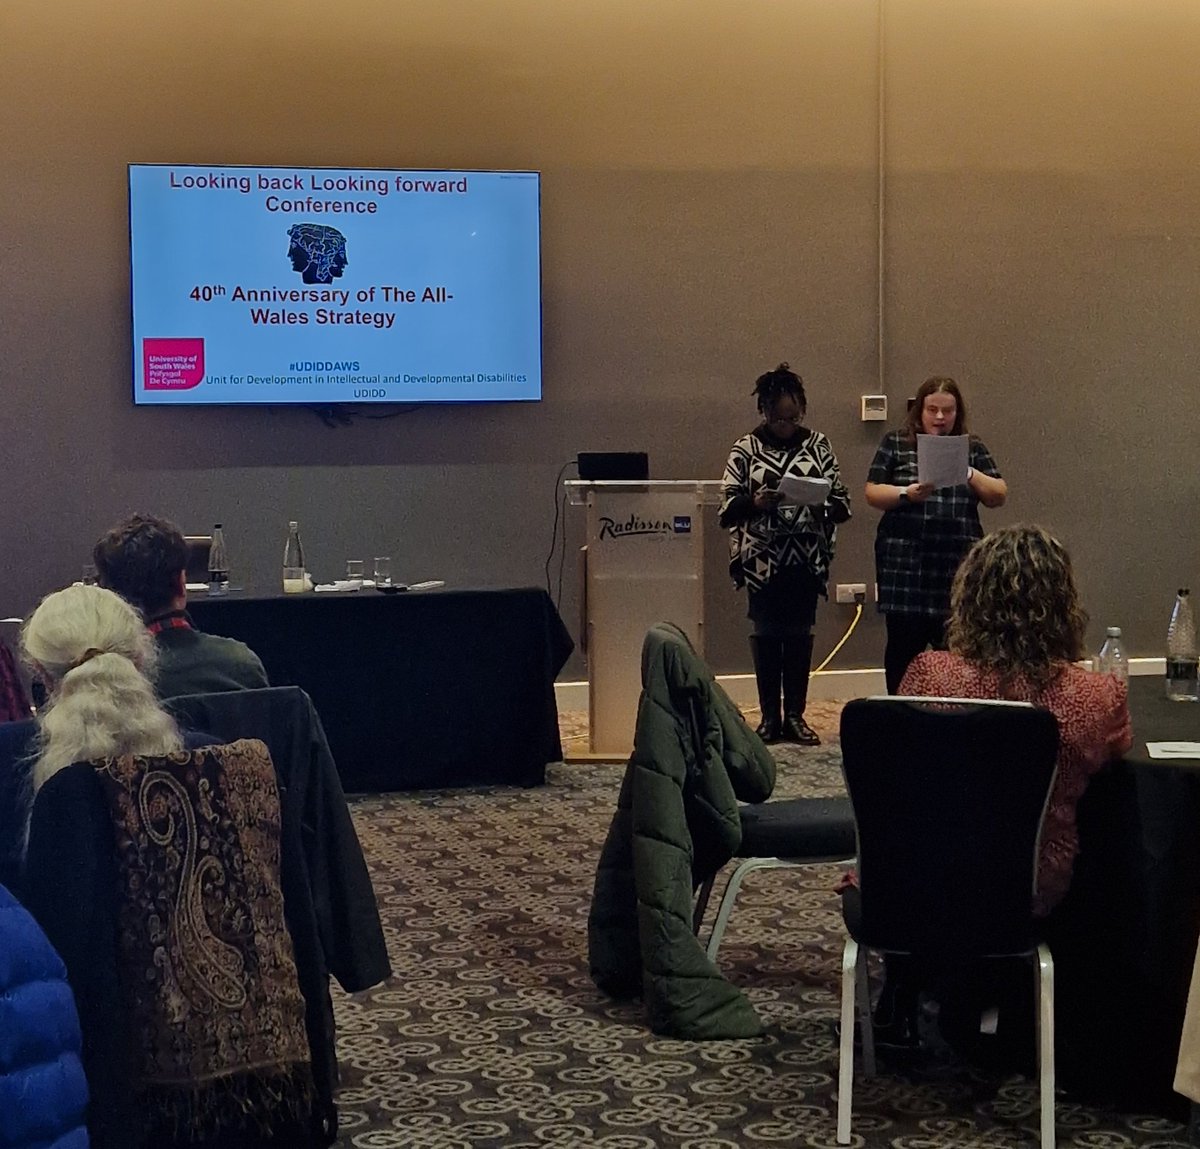 Co-Chairs of the Learning Disability Ministerial Advisory Group LDMAG @HumieWebbe and Sophie Hinksman @AllWalesPF are talking about the work of LDMAG and how they are working with @WelshGovernment to refresh the Strategic Action Plan for Learning Disabilities #UDIDDAWS